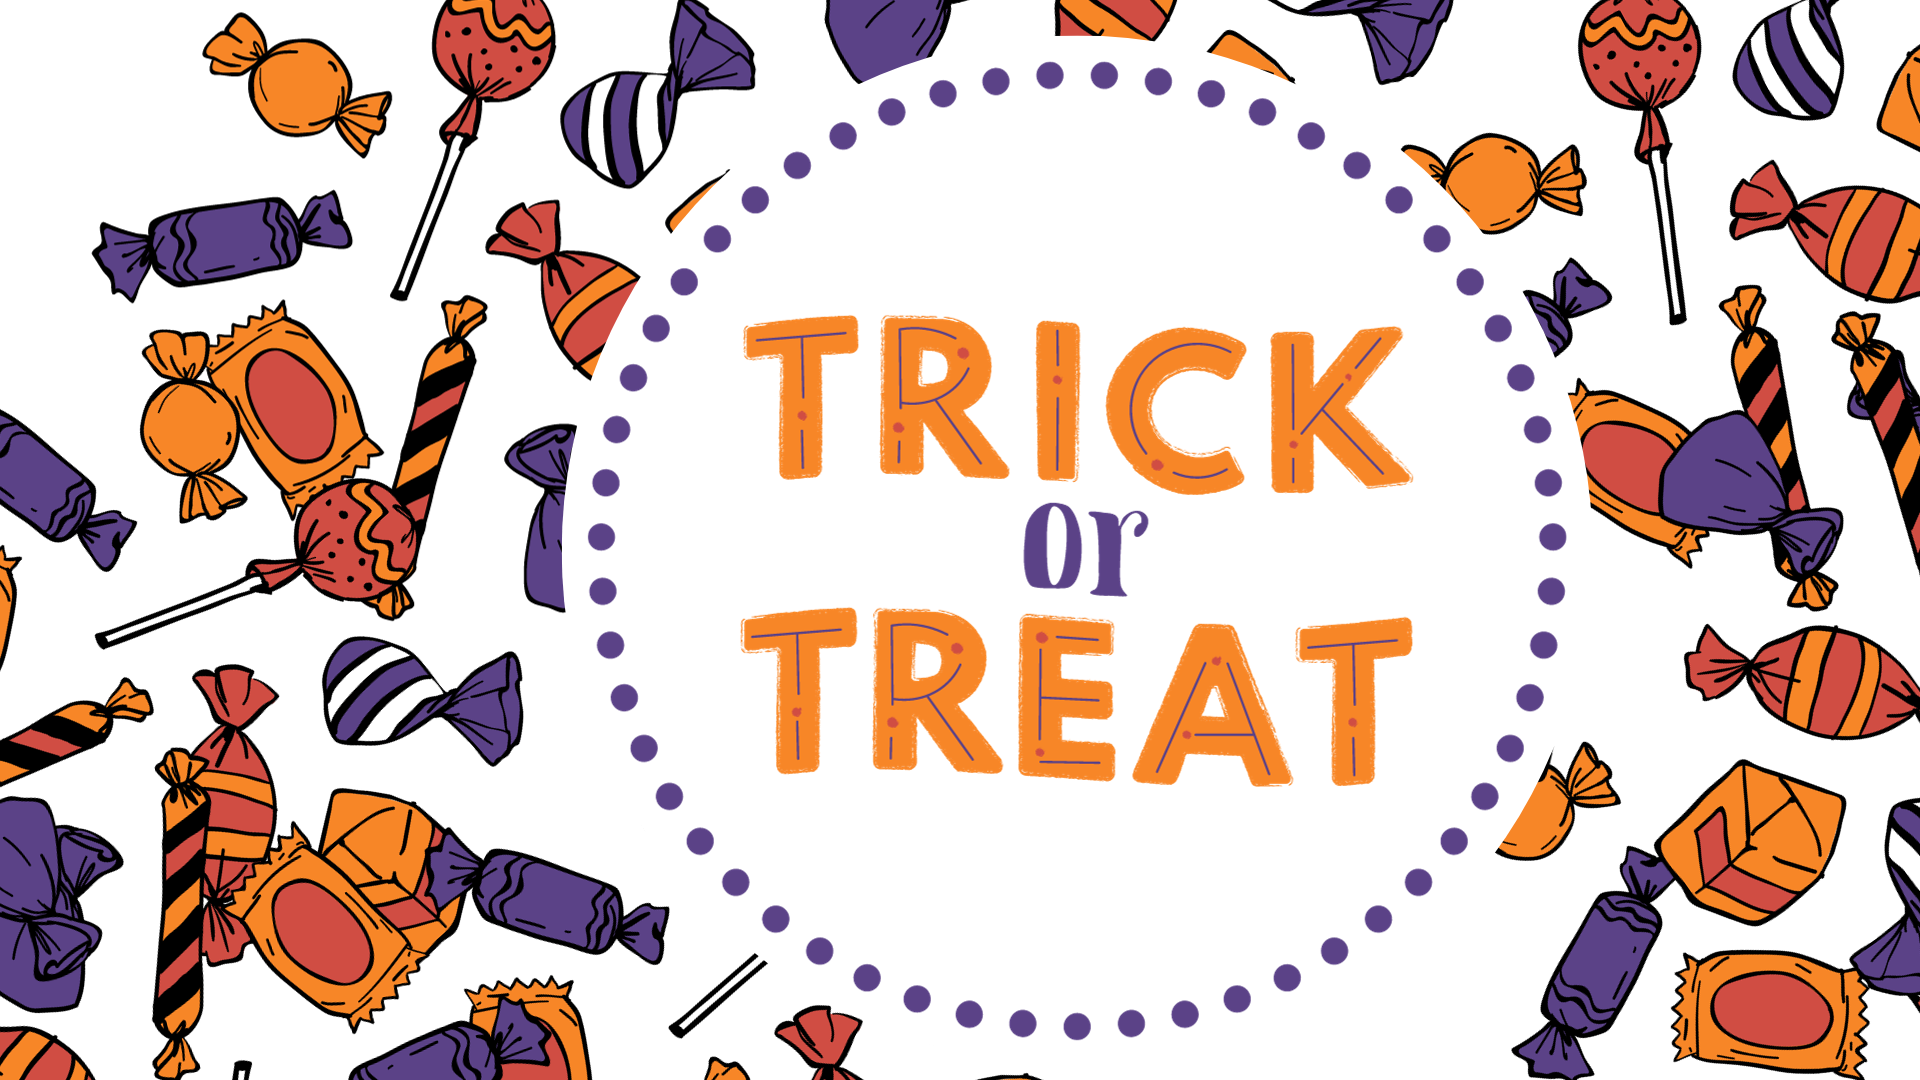 Trick or Treat with orange and purple candy background